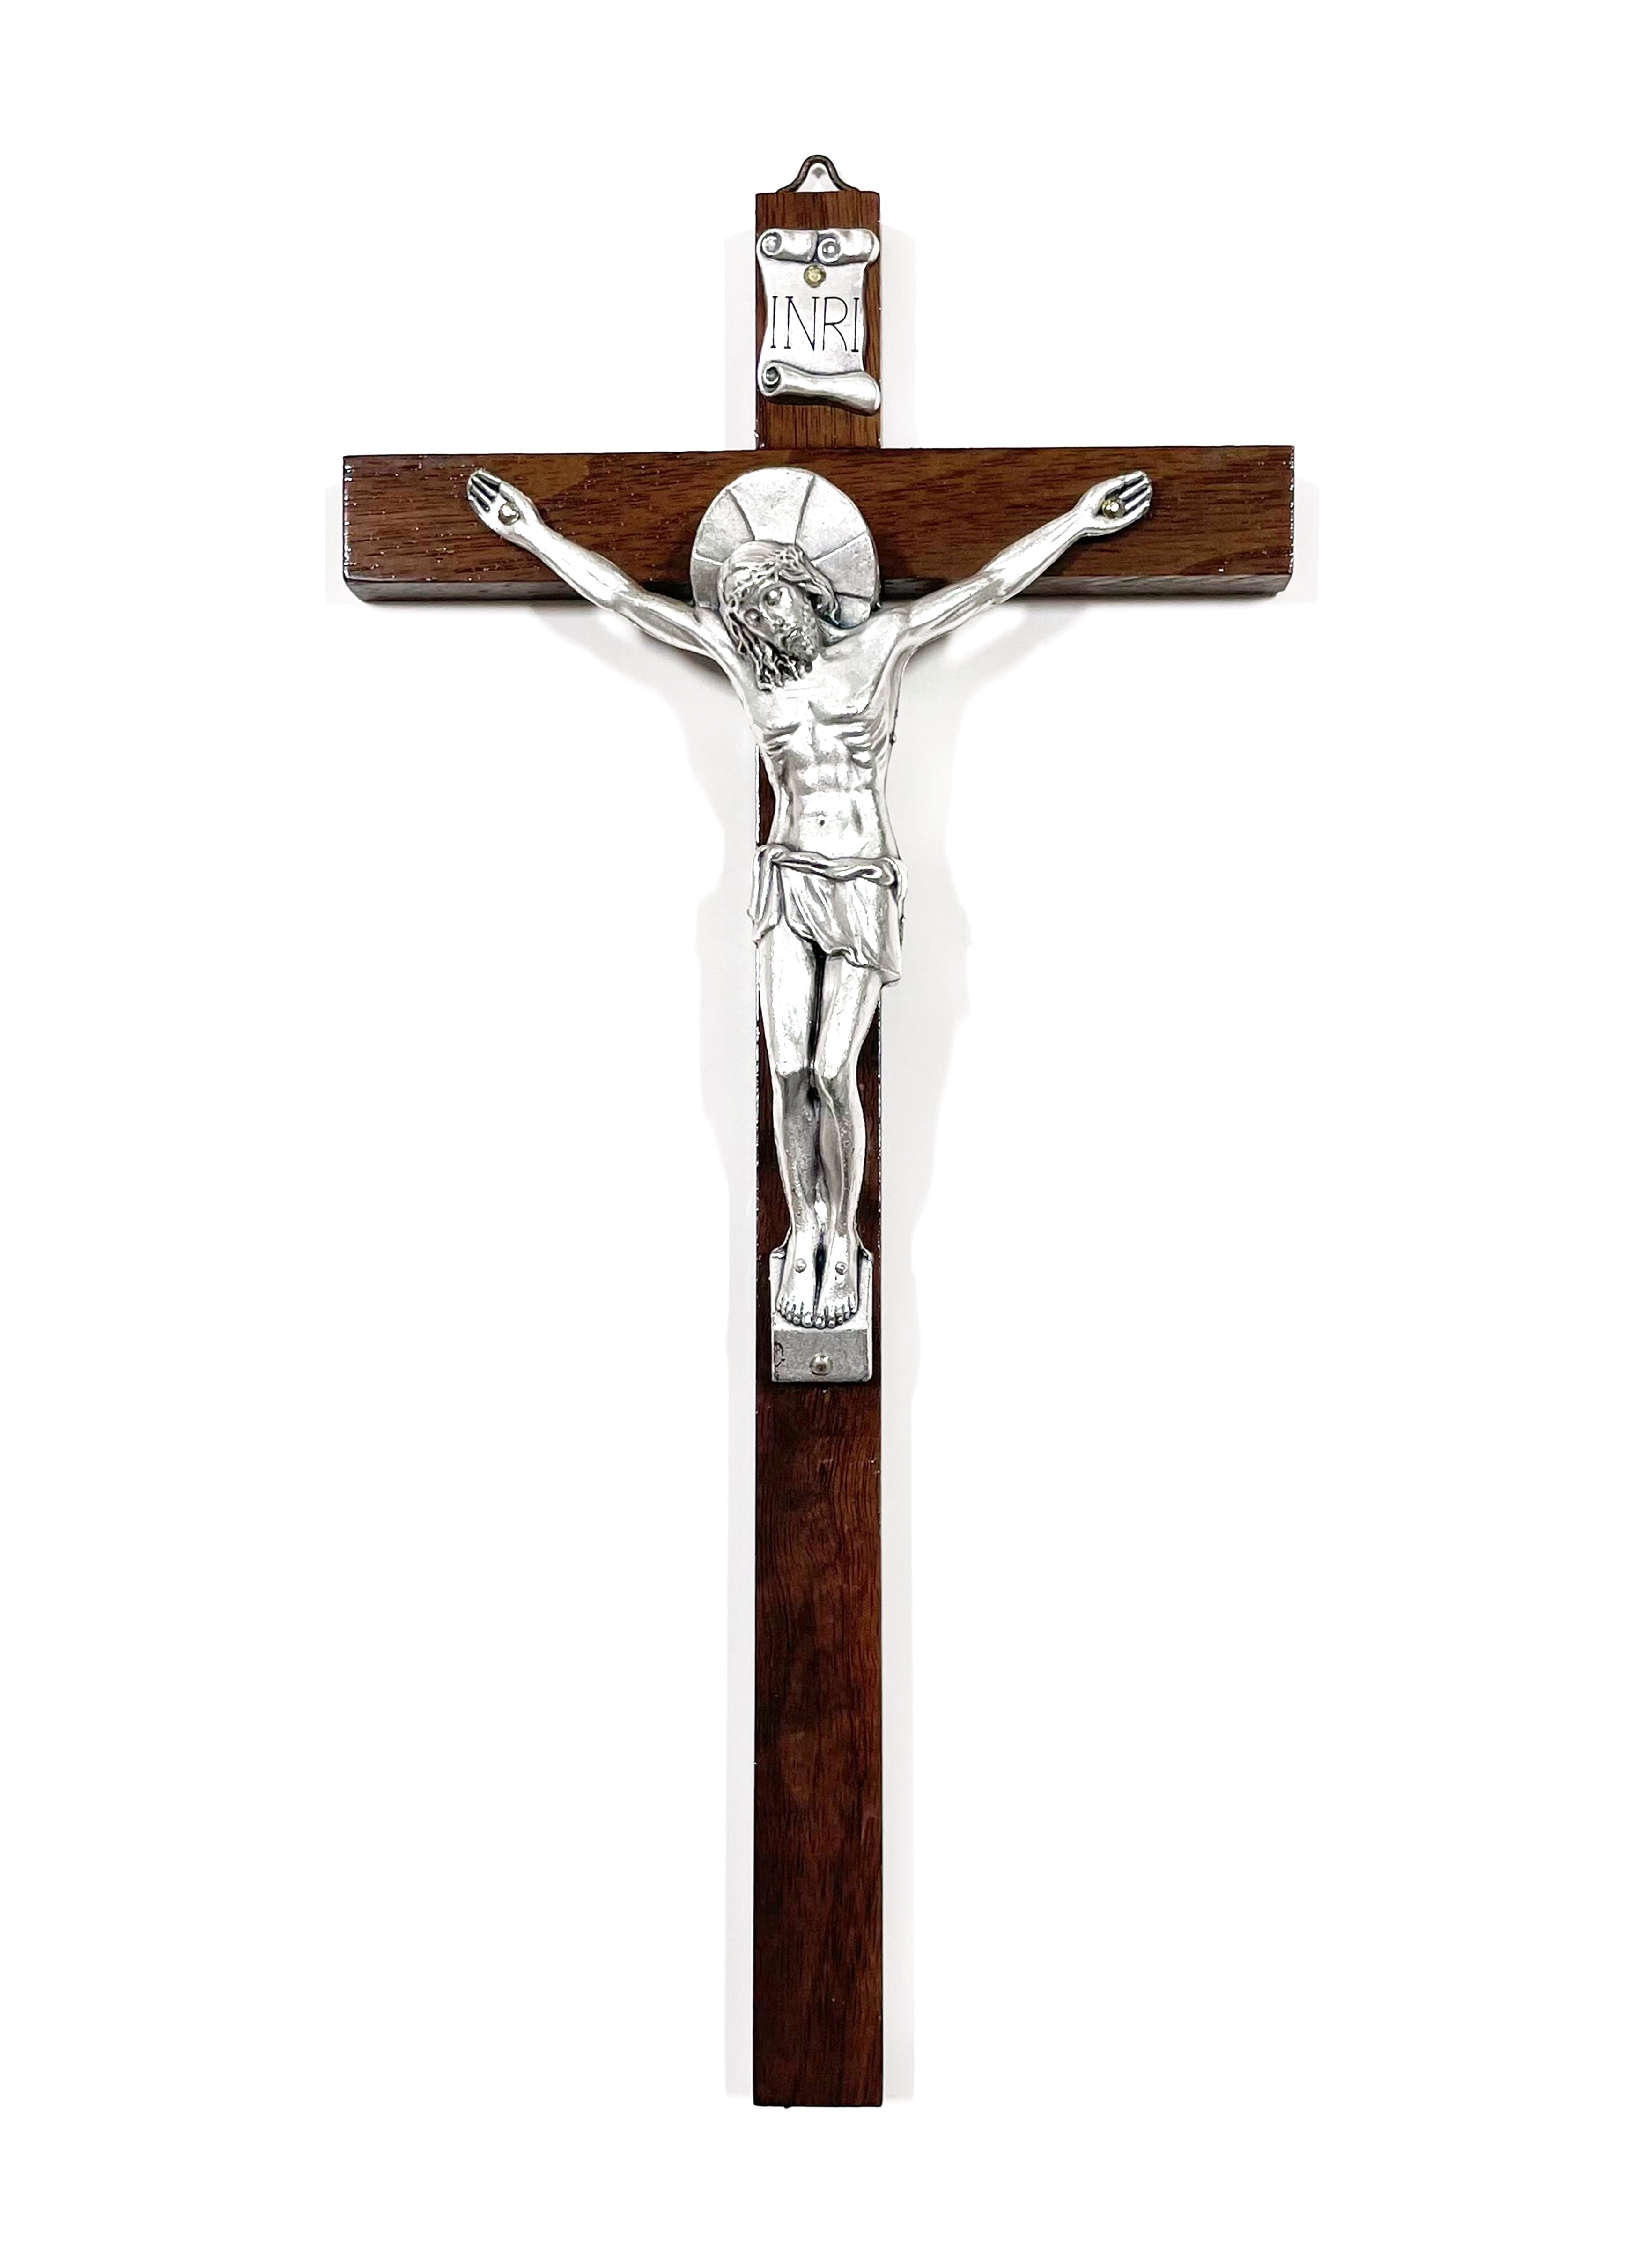 Wooden crucifix with metal body and halo included